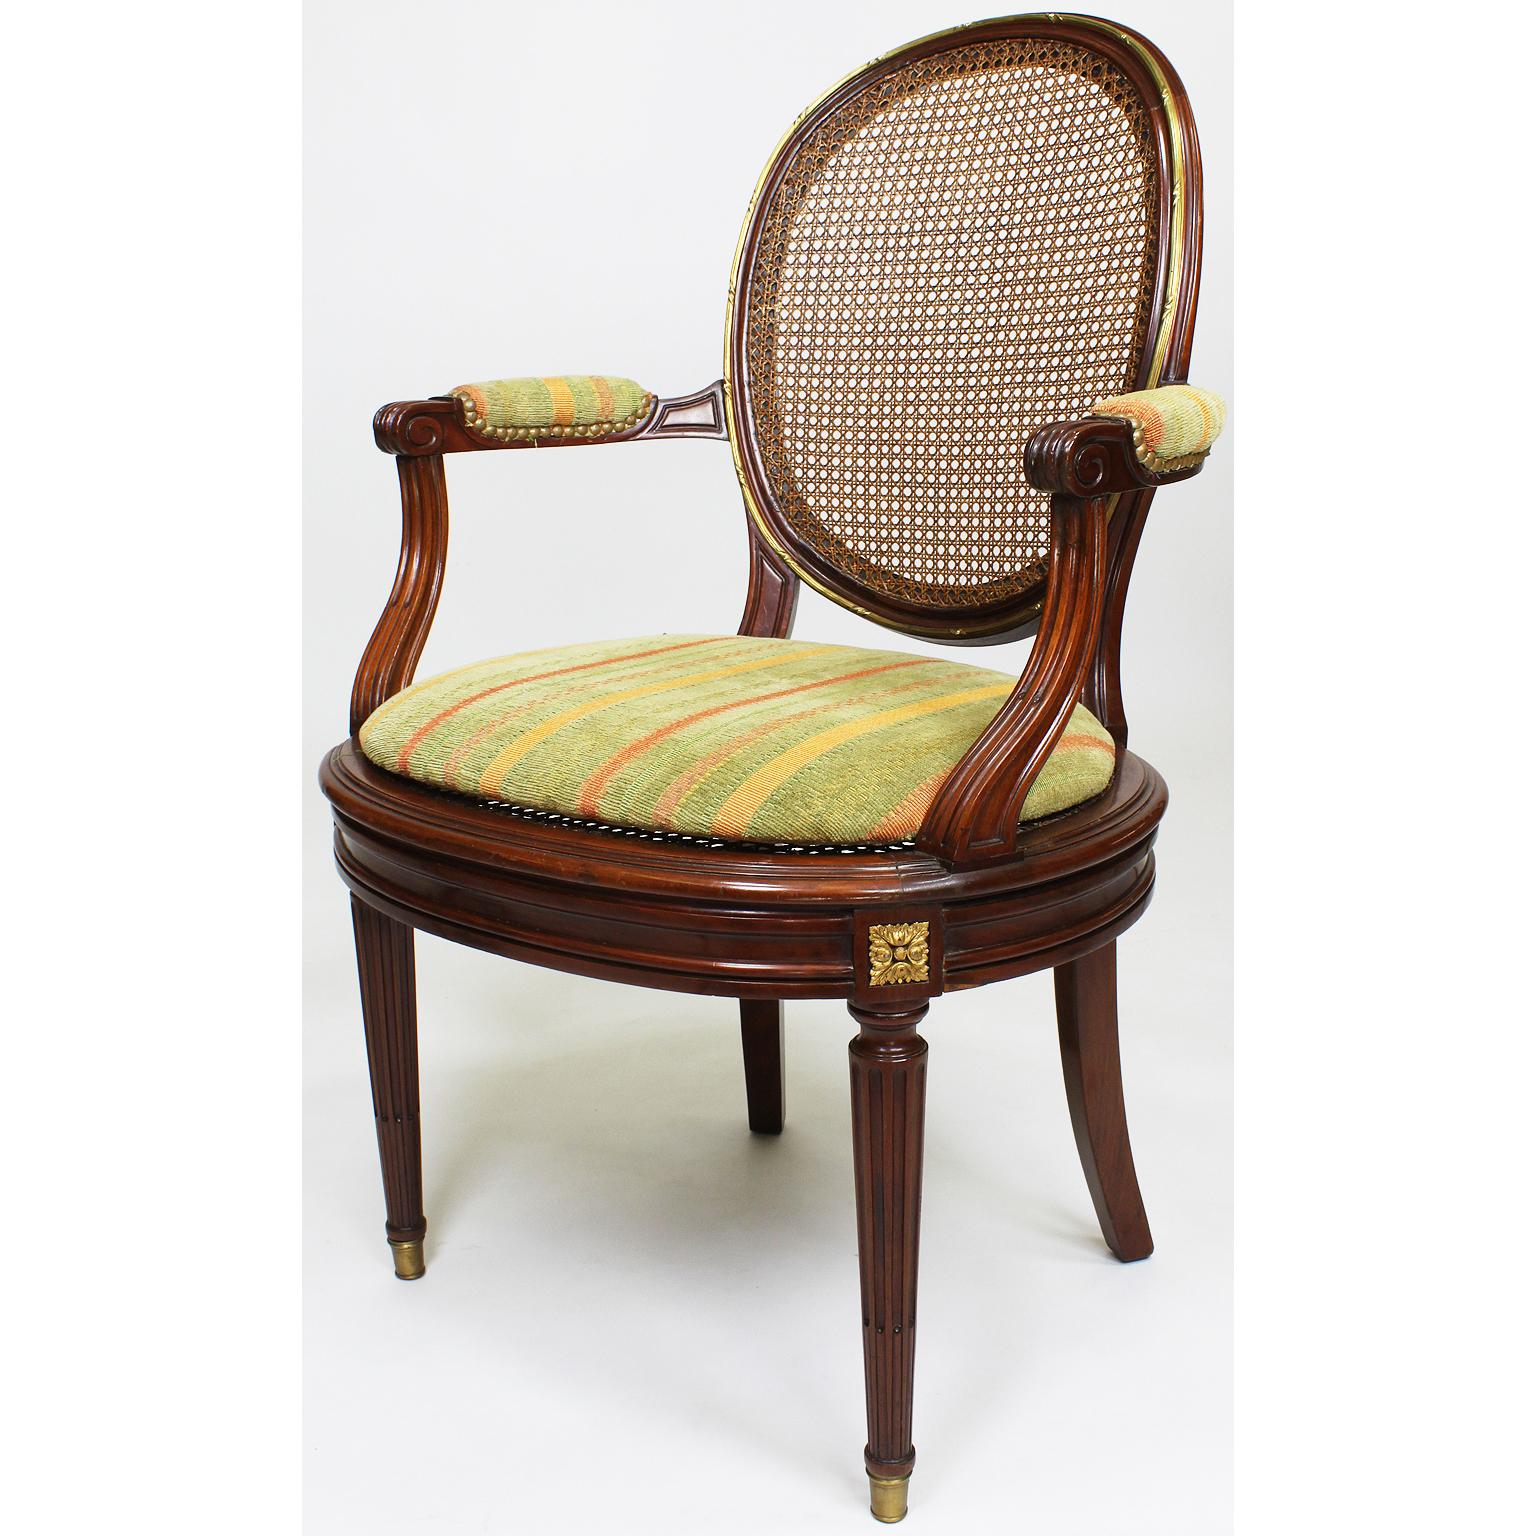 A fine pair of French 19th-20th century Louis XVI style Belle Époque mahogany and ormolu mounted dining or desk armchairs. The ovoid cane-backrests and seats, with padded open armrests, surmounted with a banded gilt-bronze trim and medallions,